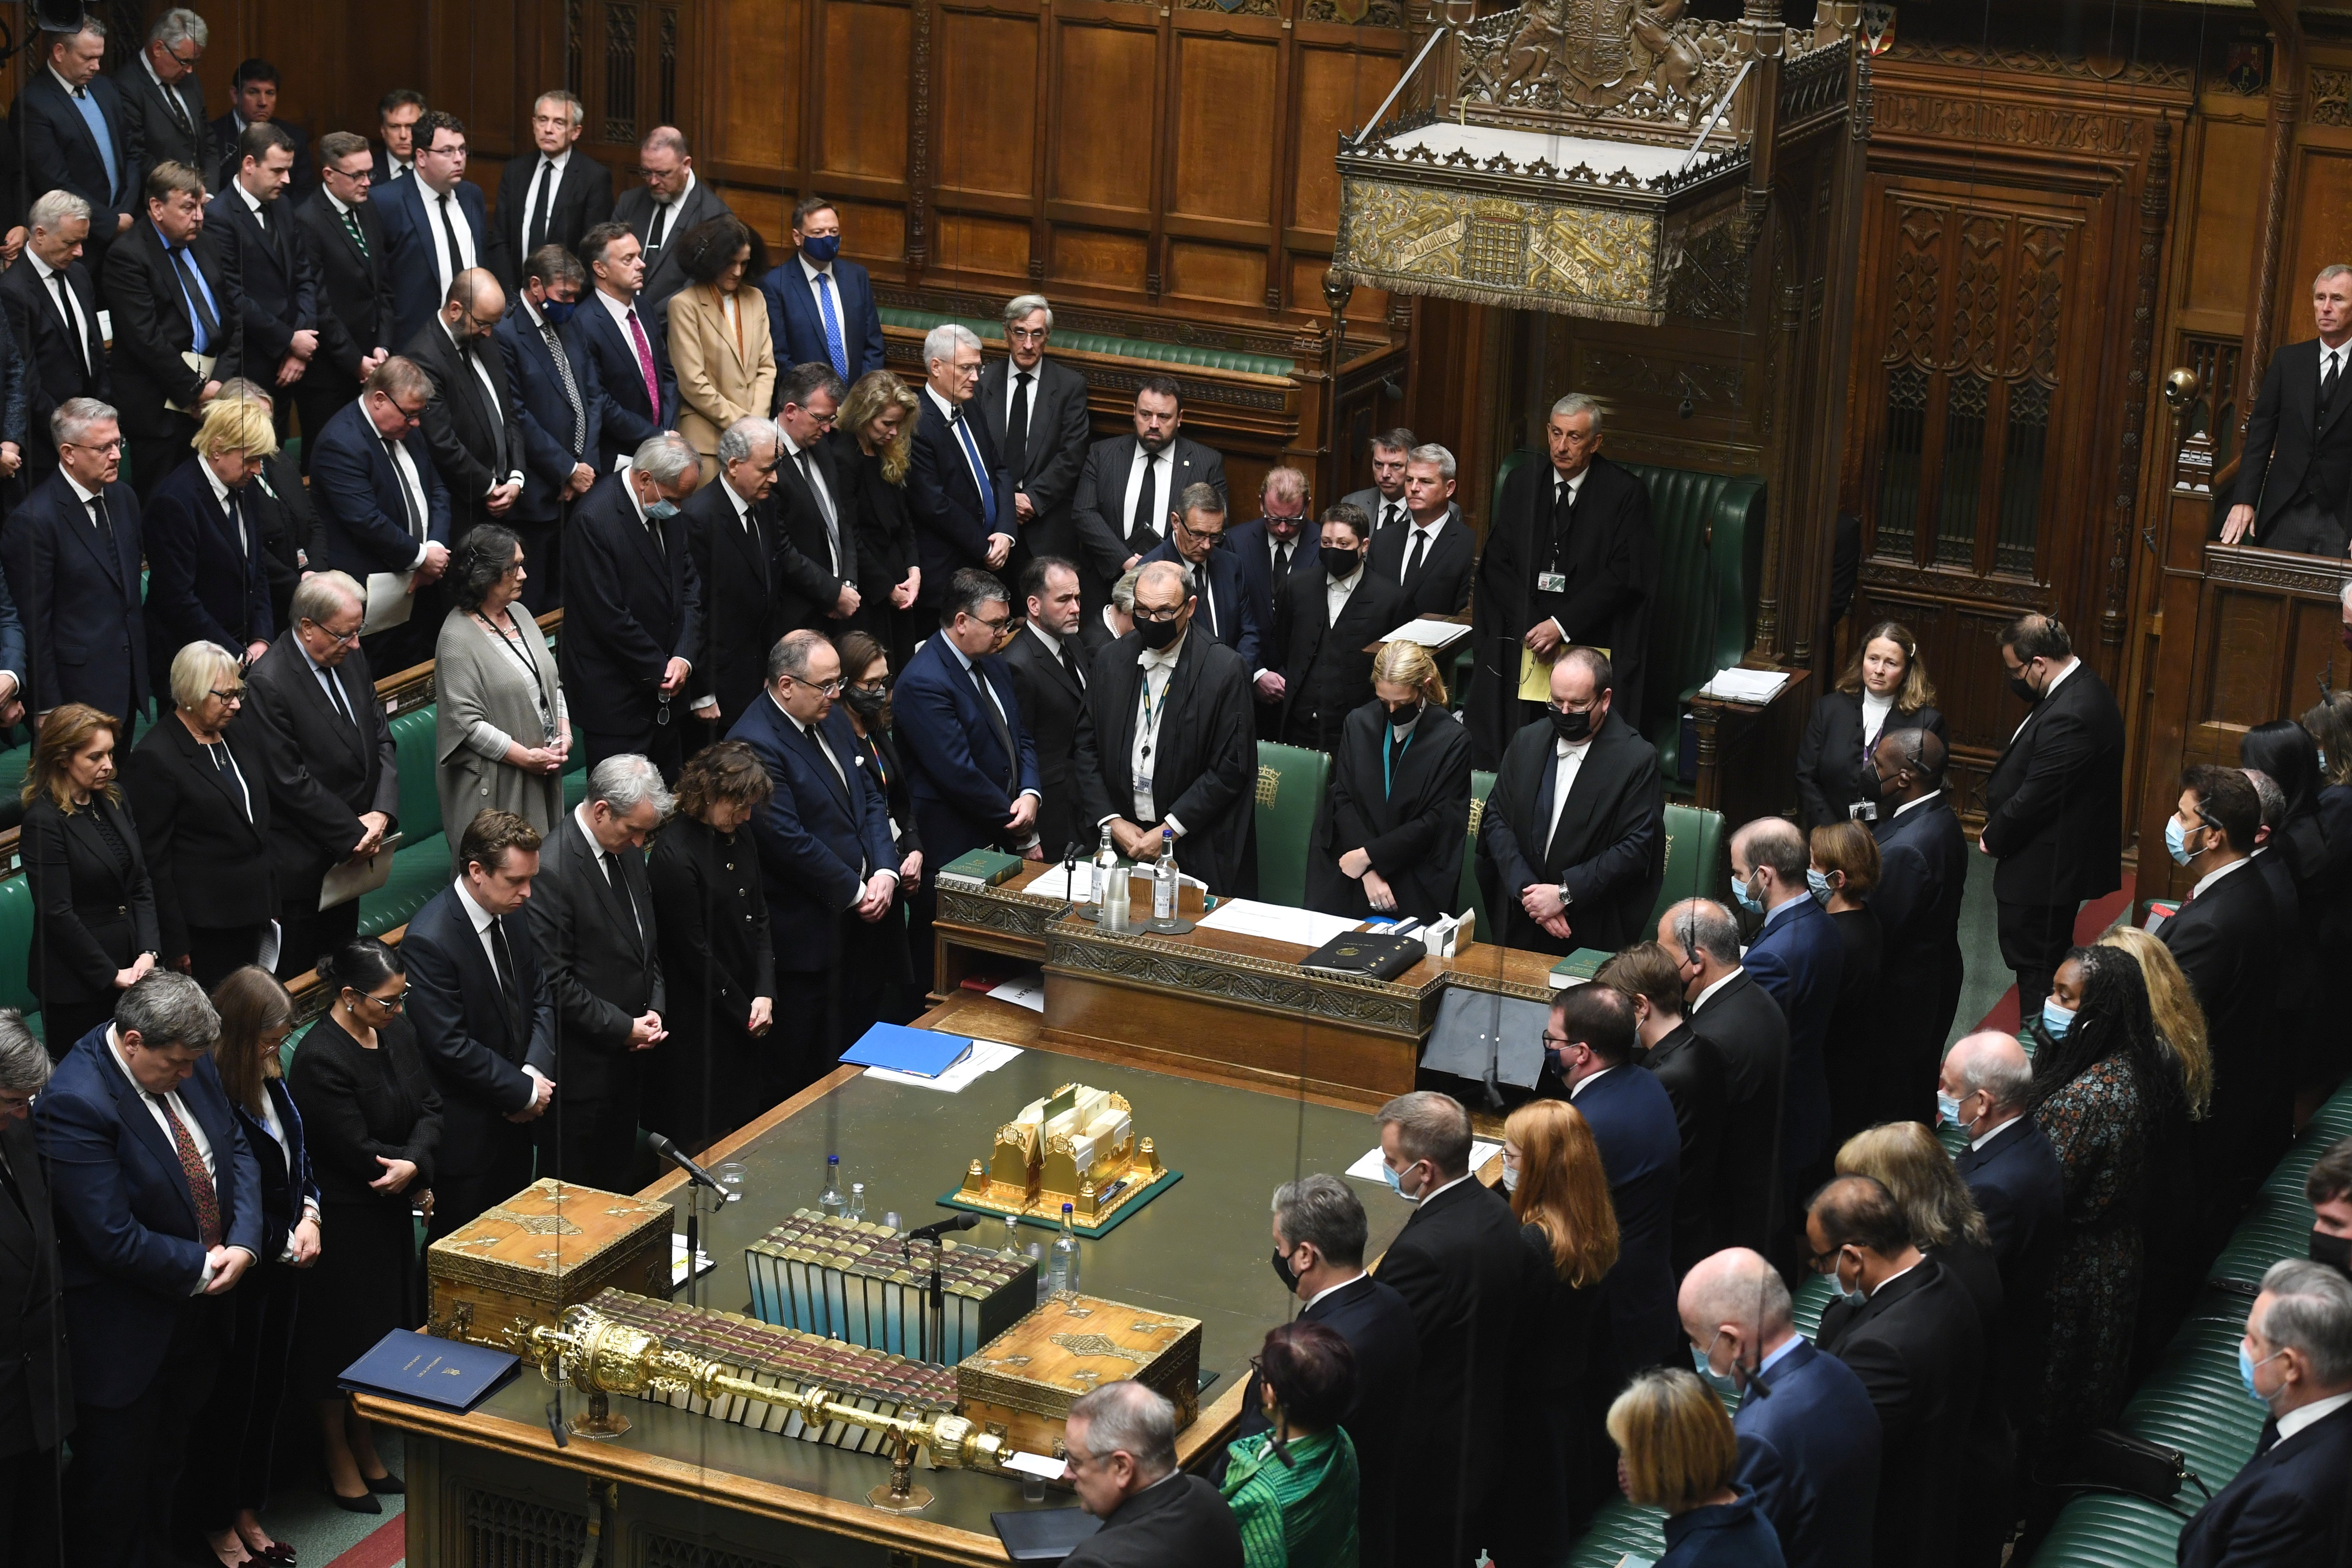 MPs pay tribute to Sir David Amess with a minute’s silence. Boris Johnson was missing from the front bench